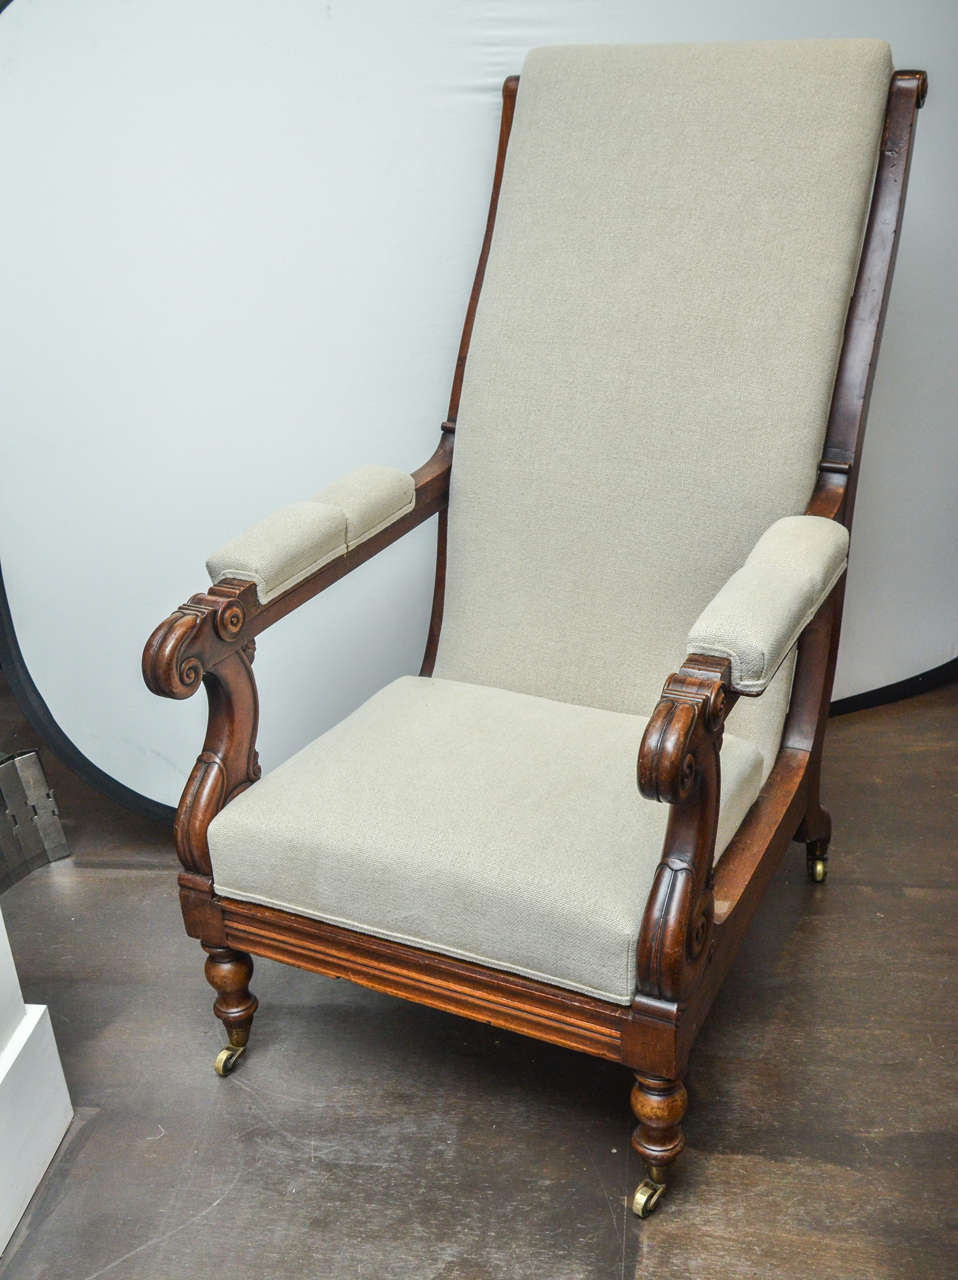 19th Century Antique Mahogany William IV Period Armchair

Sturdy mahogany frame, beautiful hand-carved details, and brass casters. 

This armchair has been newly reupholstered in a neutral beige linen fabric. 
